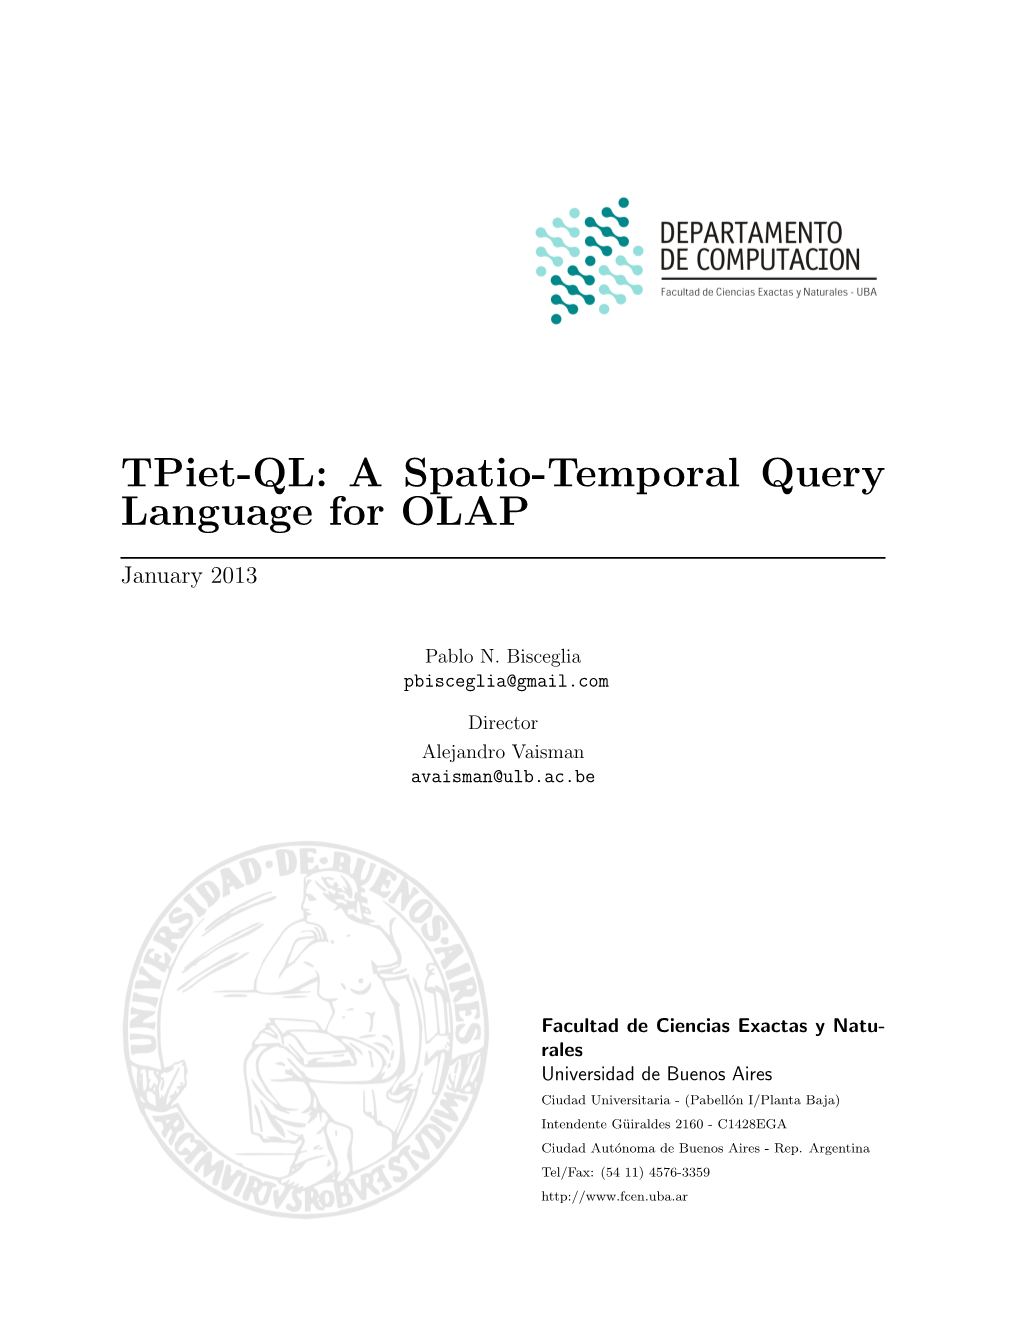 Tpiet-QL: a Spatio-Temporal Query Language for OLAP